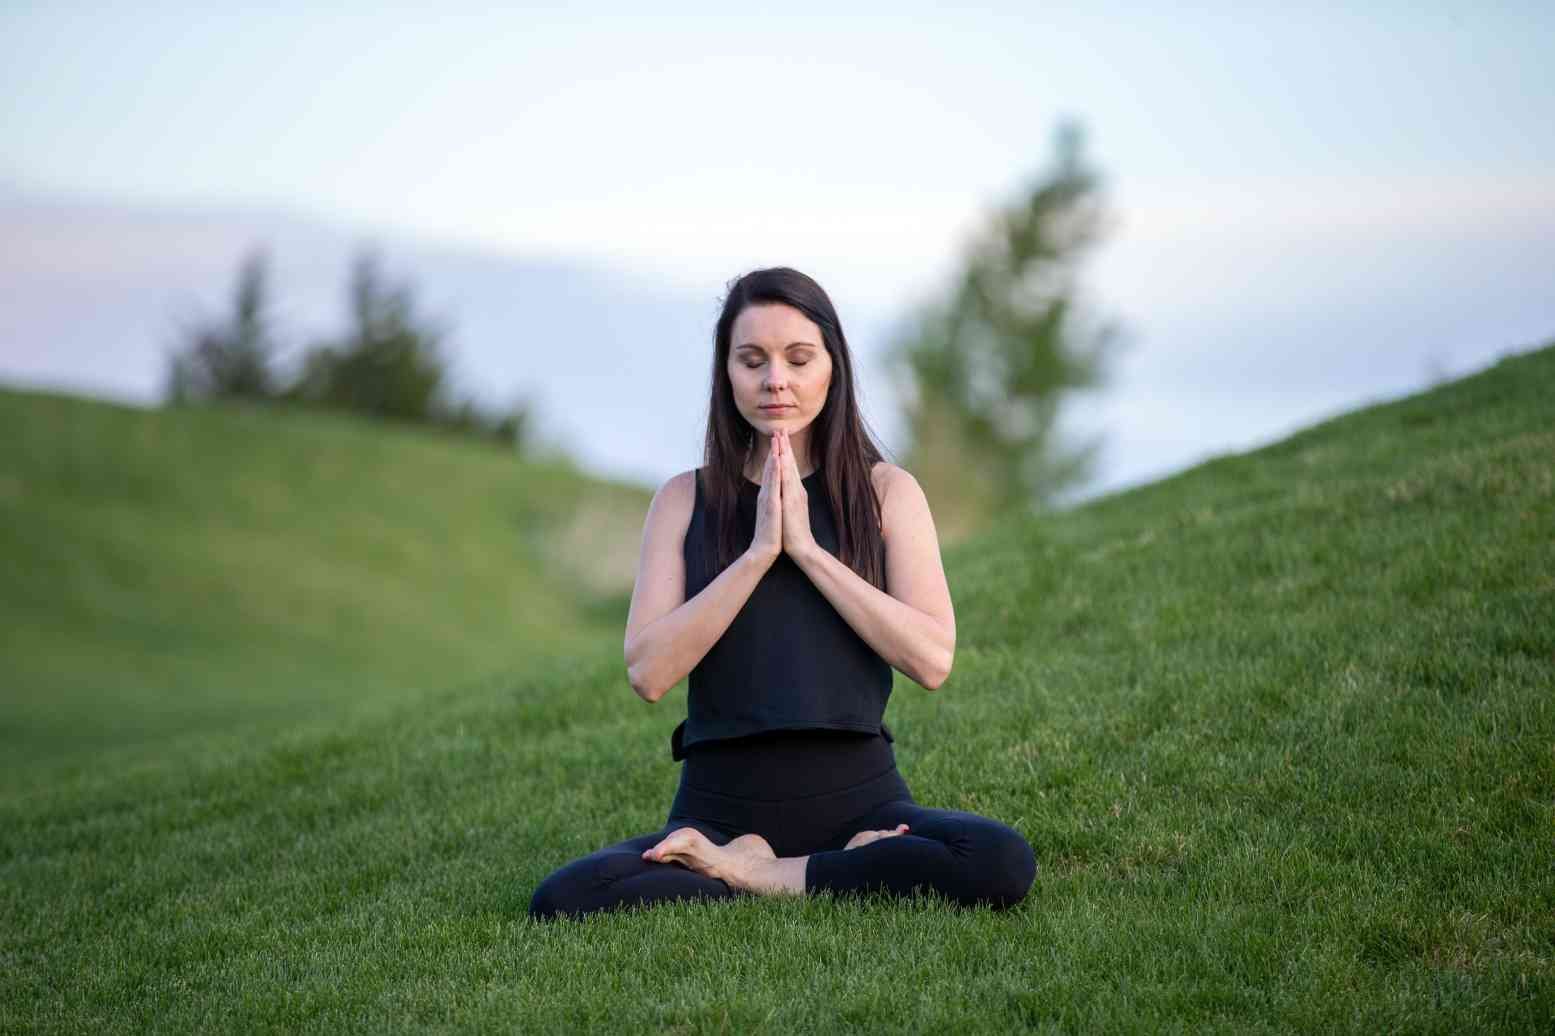 BEST 10 THINGS TO DO BEFORE MEDITATION